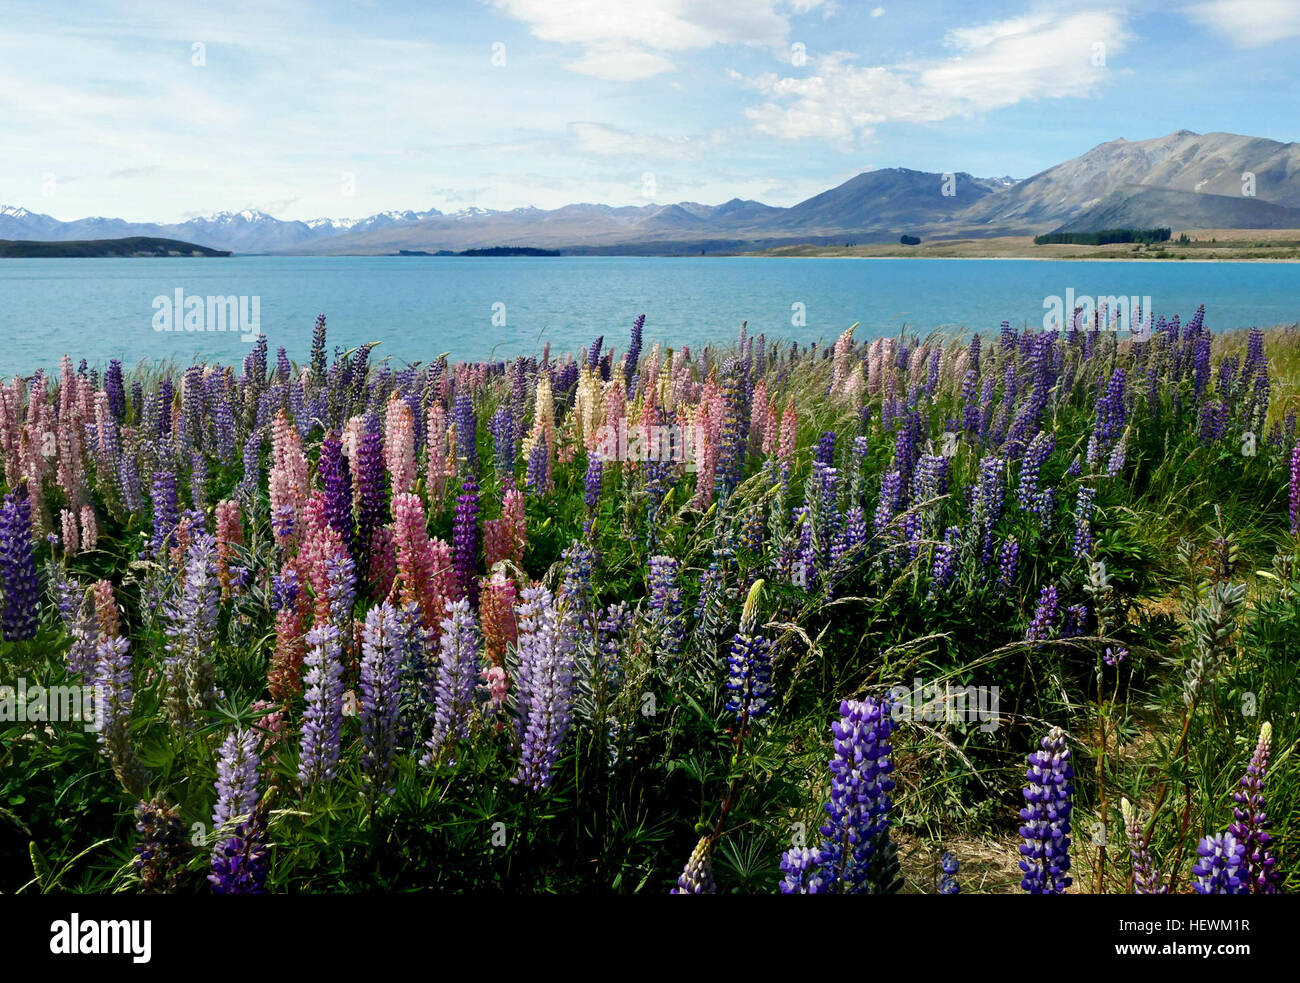 For about 4-5 weeks at the end of each year, the center of New Zealand’s South Island bursts into color — purples and pinks and blues and yellows sprout up along lake sides and in riverbeds in Mackenzie Country, making the already-stunning views even more incredible. Stock Photo